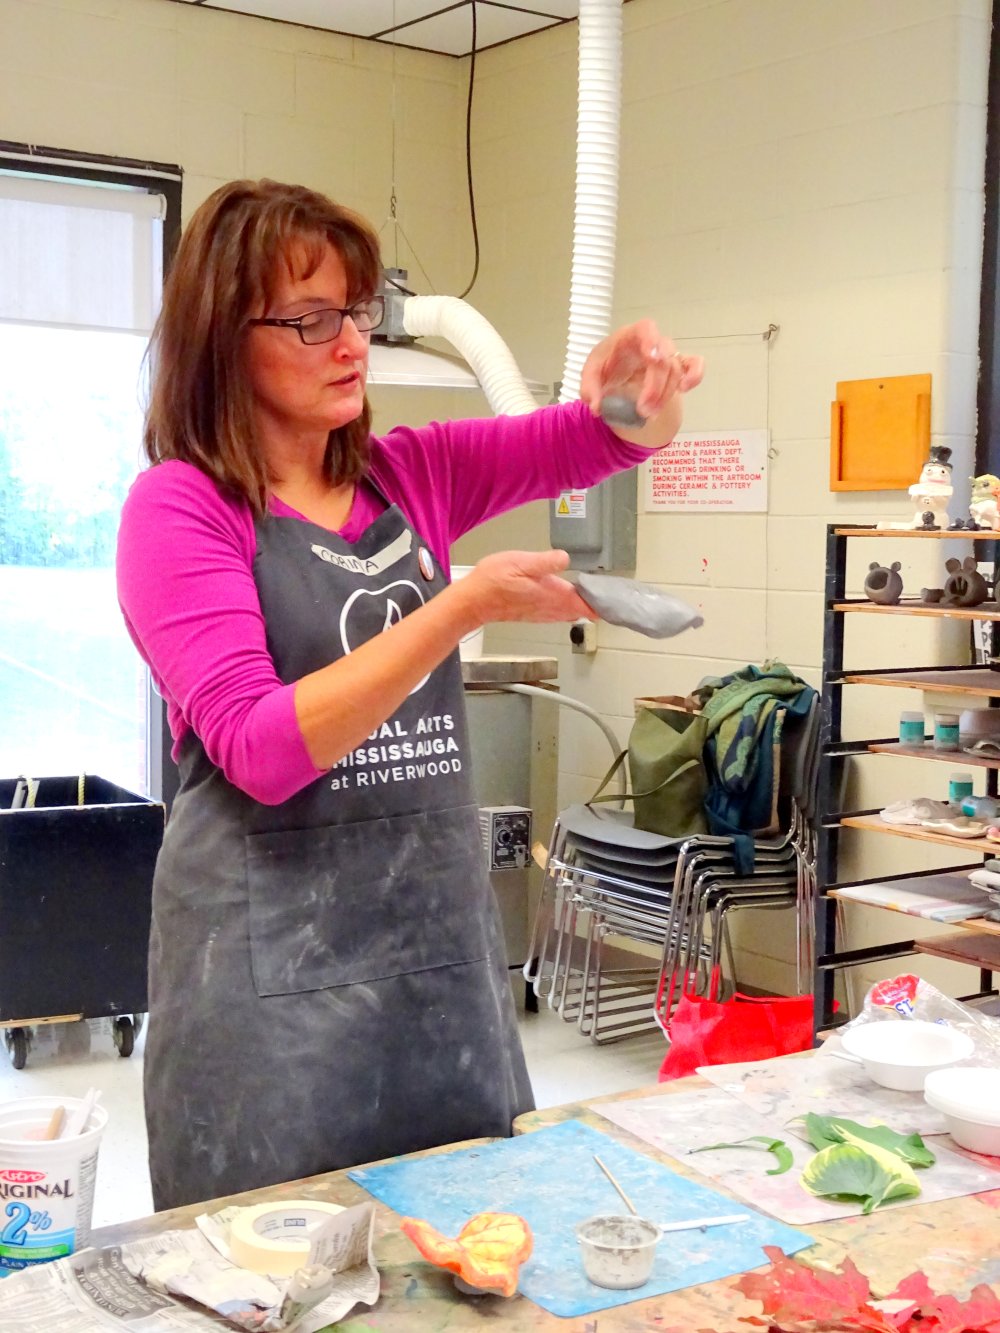 Art Instructor Corina teaching seniors how to make clay leaves photo by I Lee, October 6, 2015